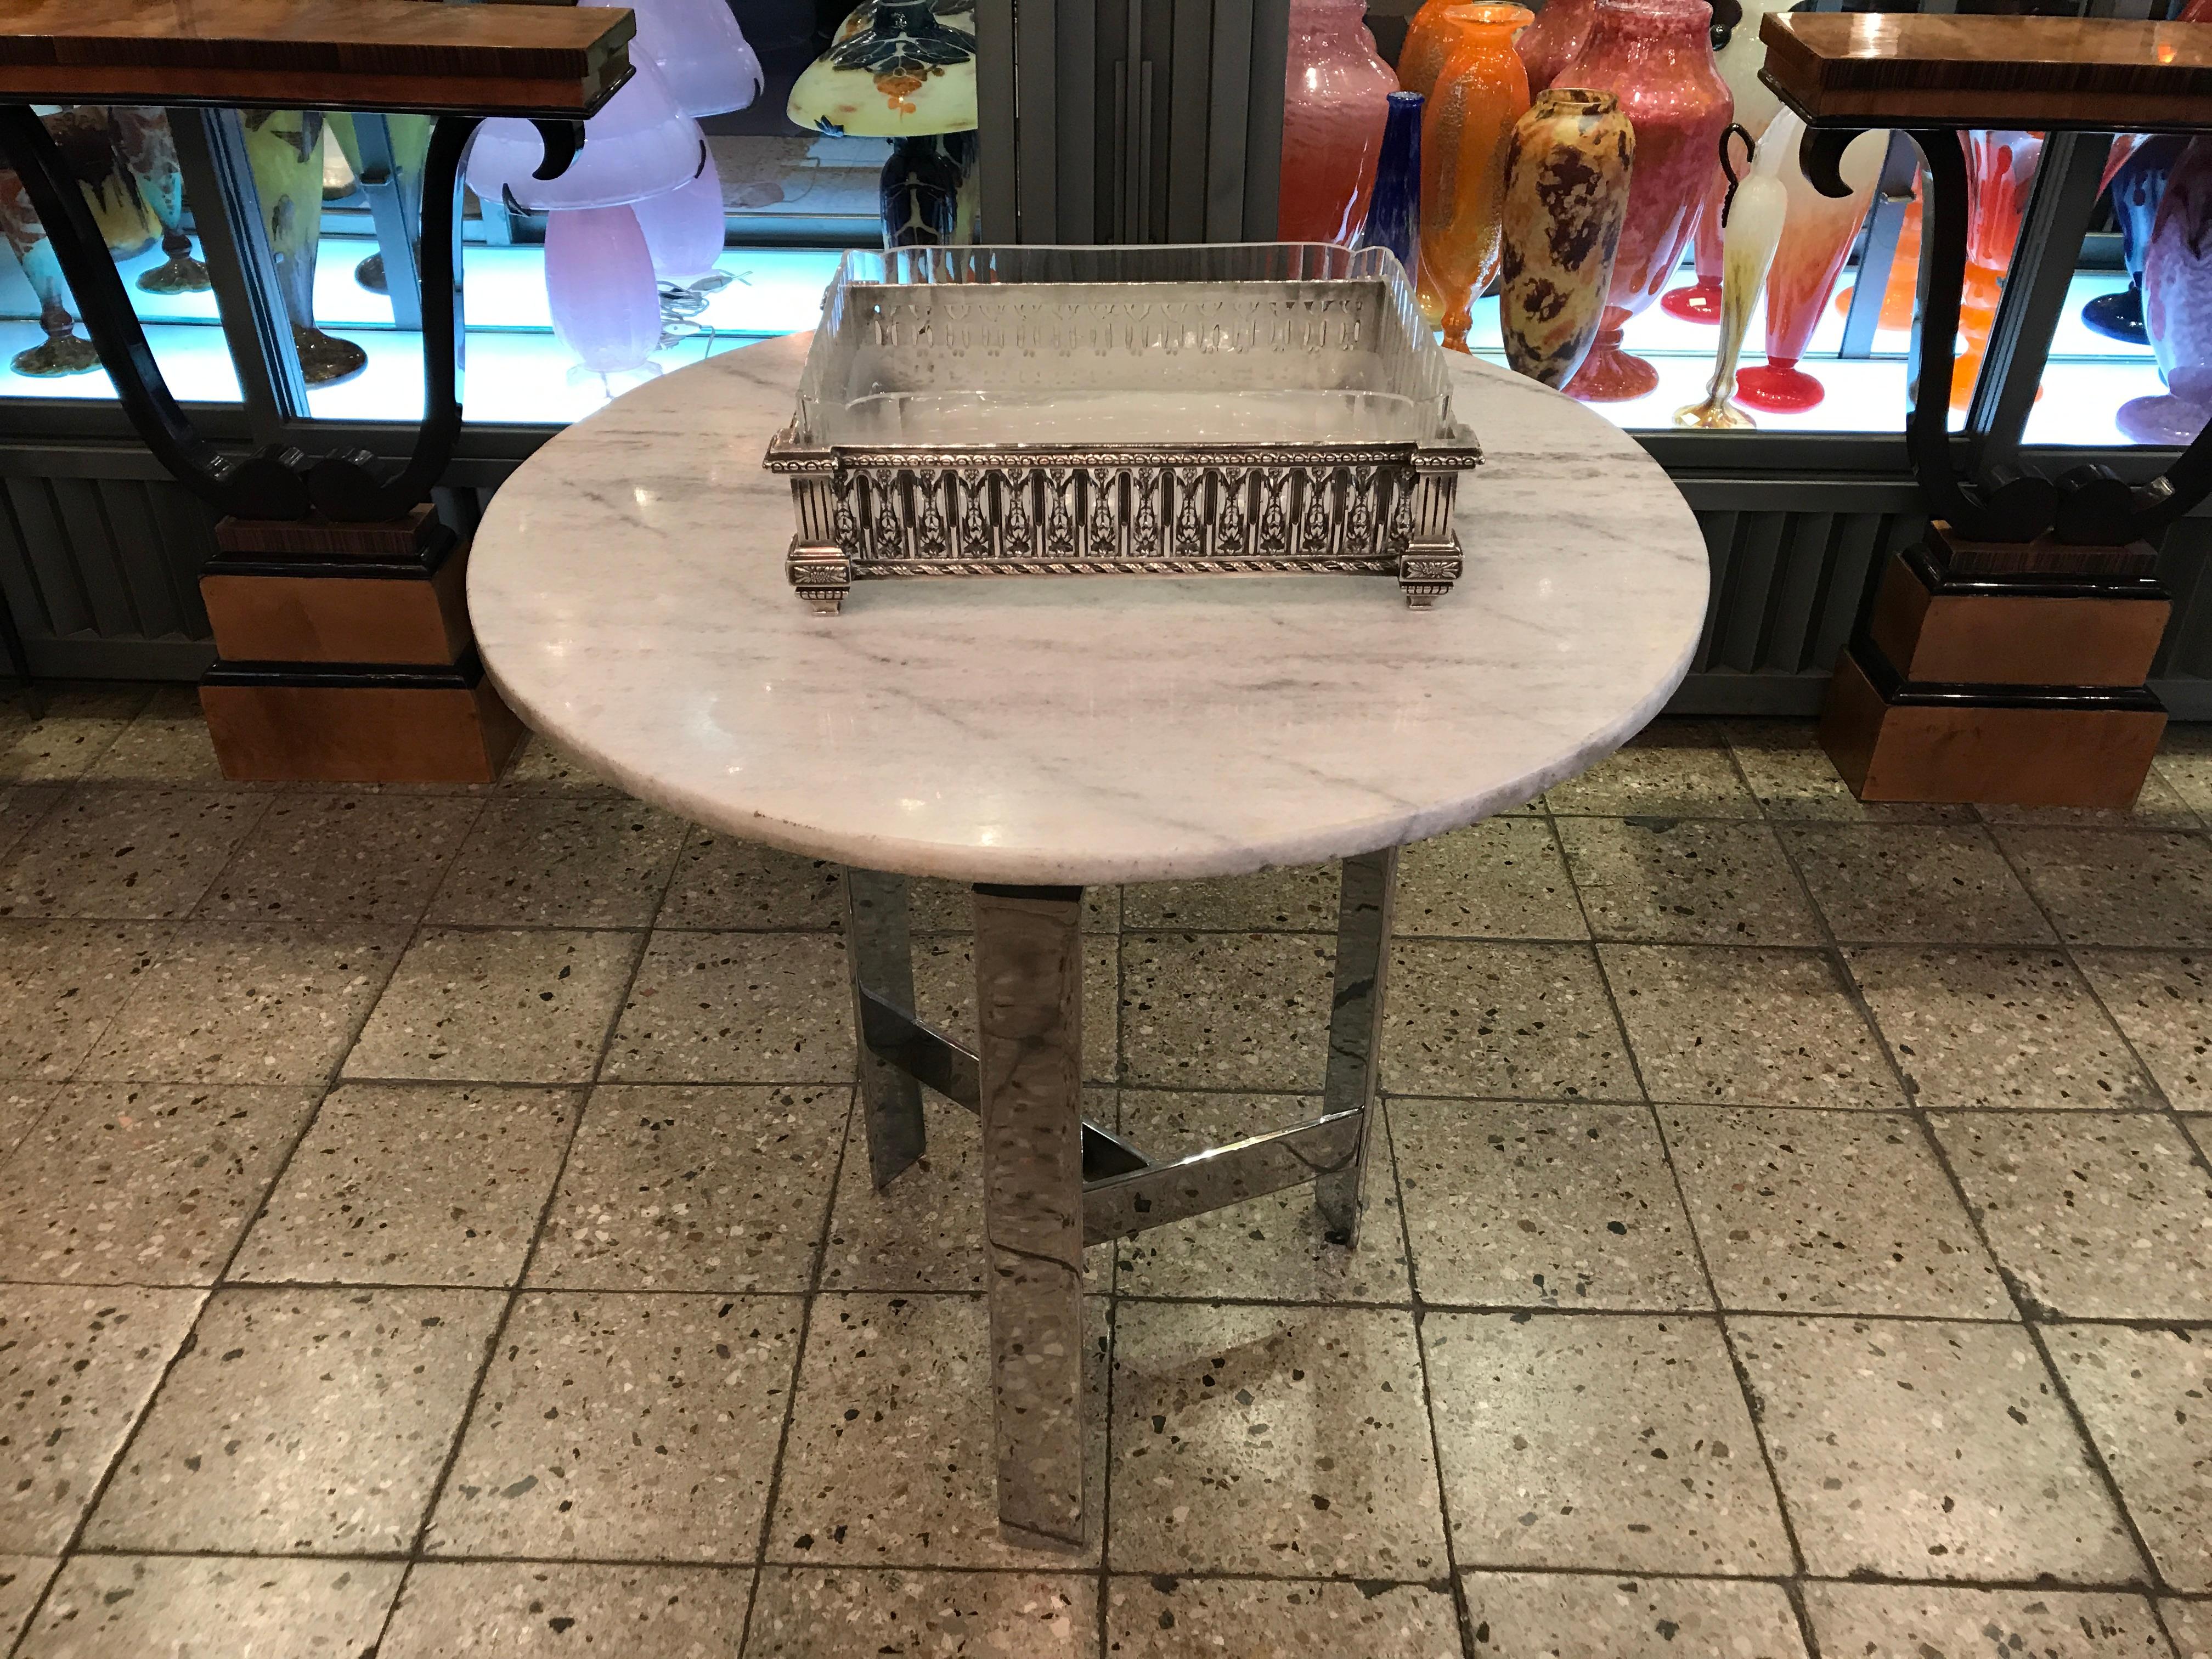 Centerplace, Sign: Christofle n: 2364323

Metal: Silver plated
We have specialized in the sale of Art Deco and Art Nouveau and Vintage styles since 1982. If you have any questions we are at your disposal.
Pushing the button that reads 'View All